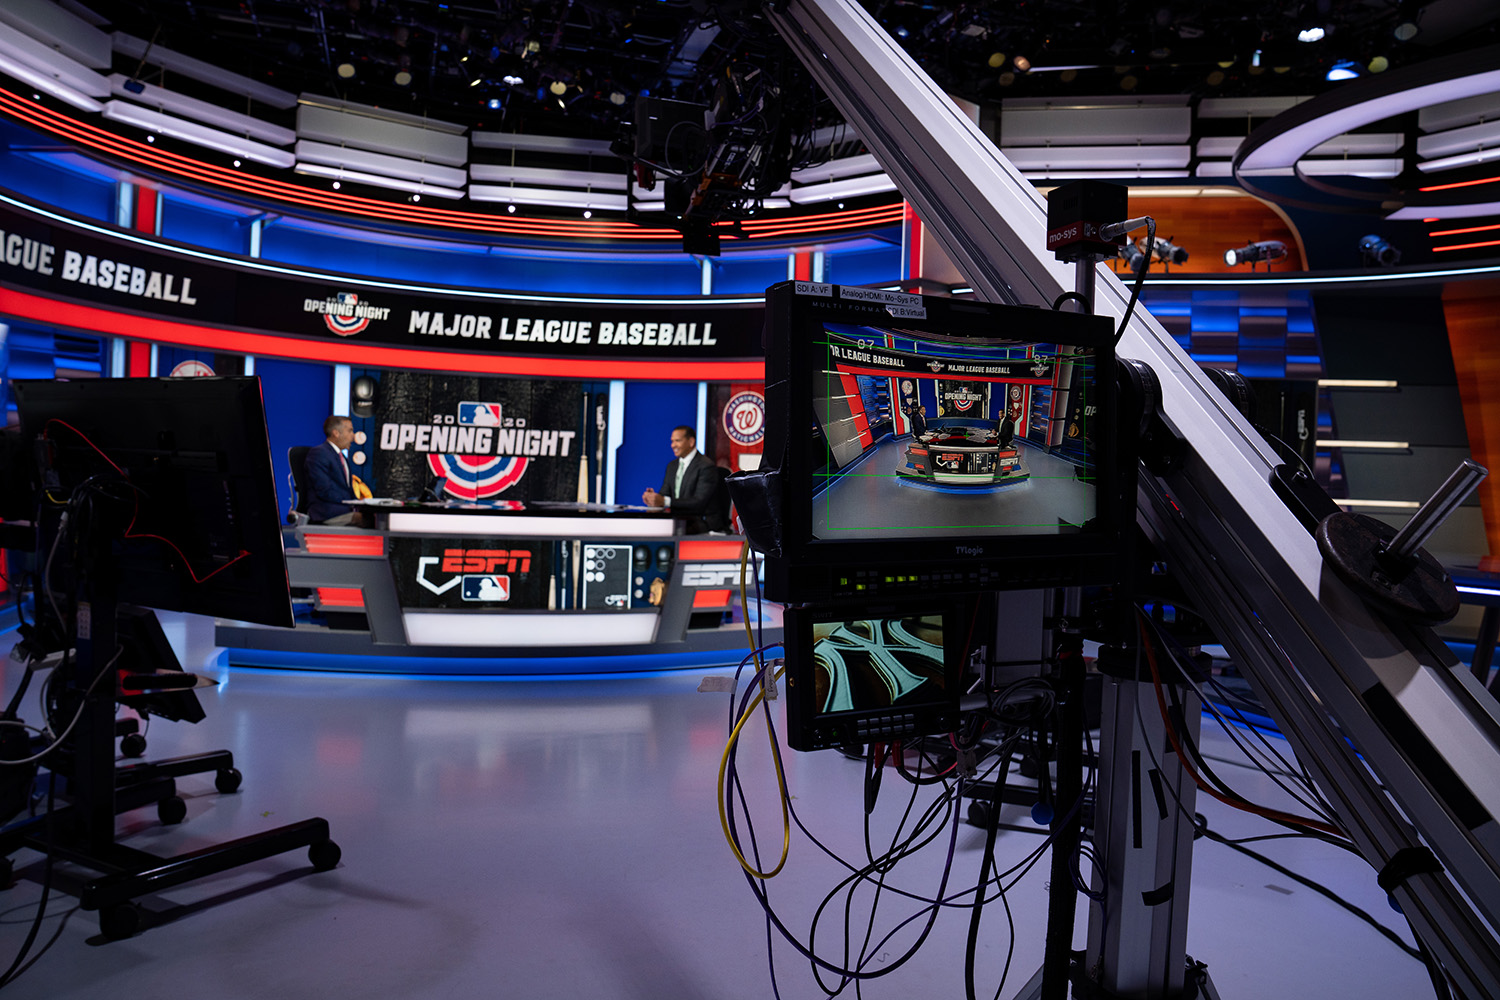 MLB Postseason ESPN Modifies REMI Model To Produce Up to 21 Wild Card Games in Four Days